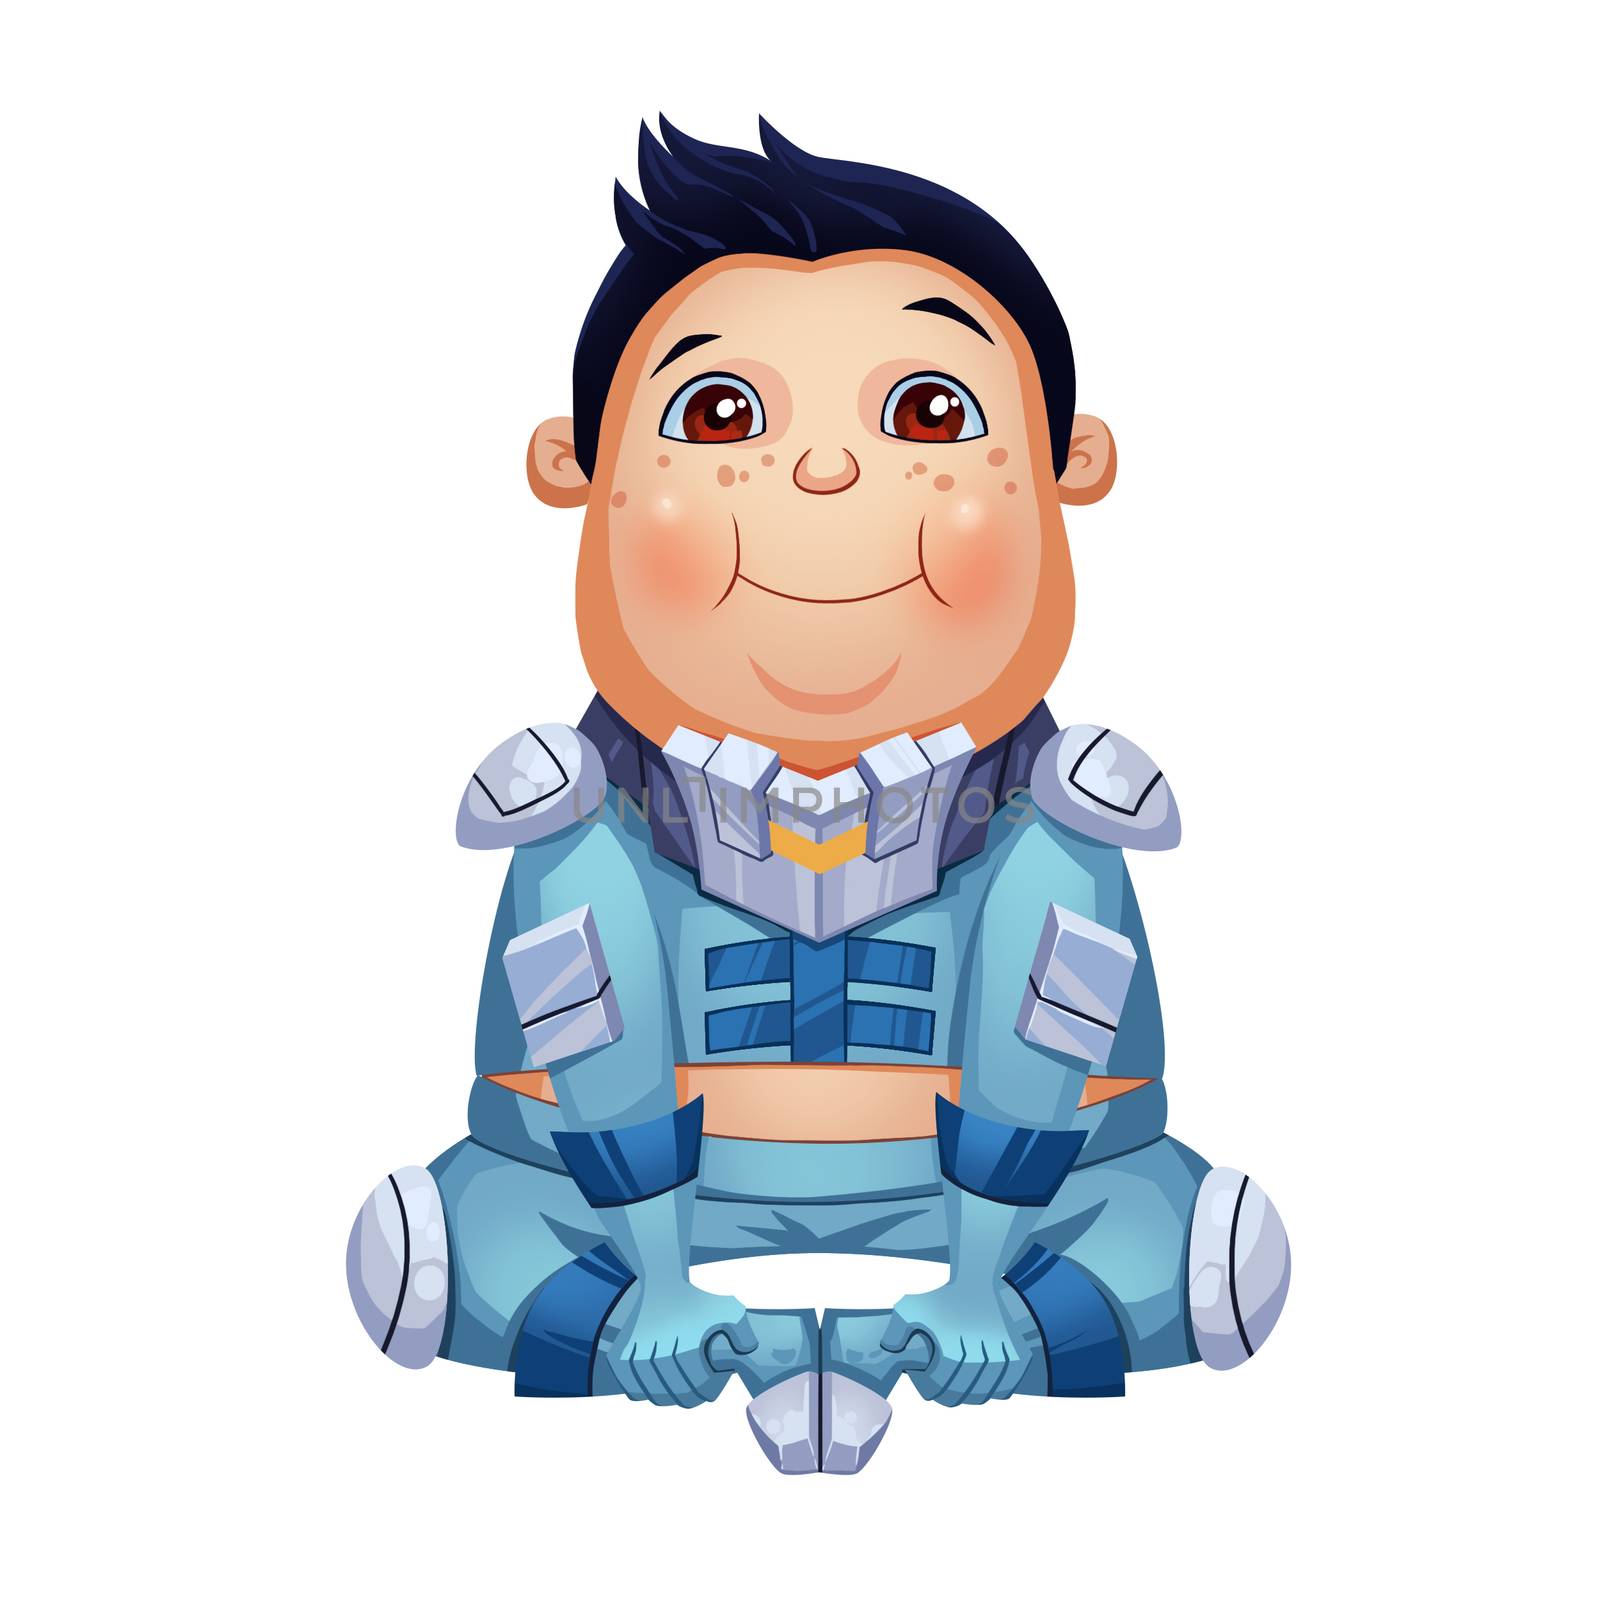 Illustration: This Fat Boy sitting on the ground, nickname "The King", member of Tramp Boy Scouts, a Space Pirates Team. Character Design. Cartoon / Sci-Fi Style by NextMars